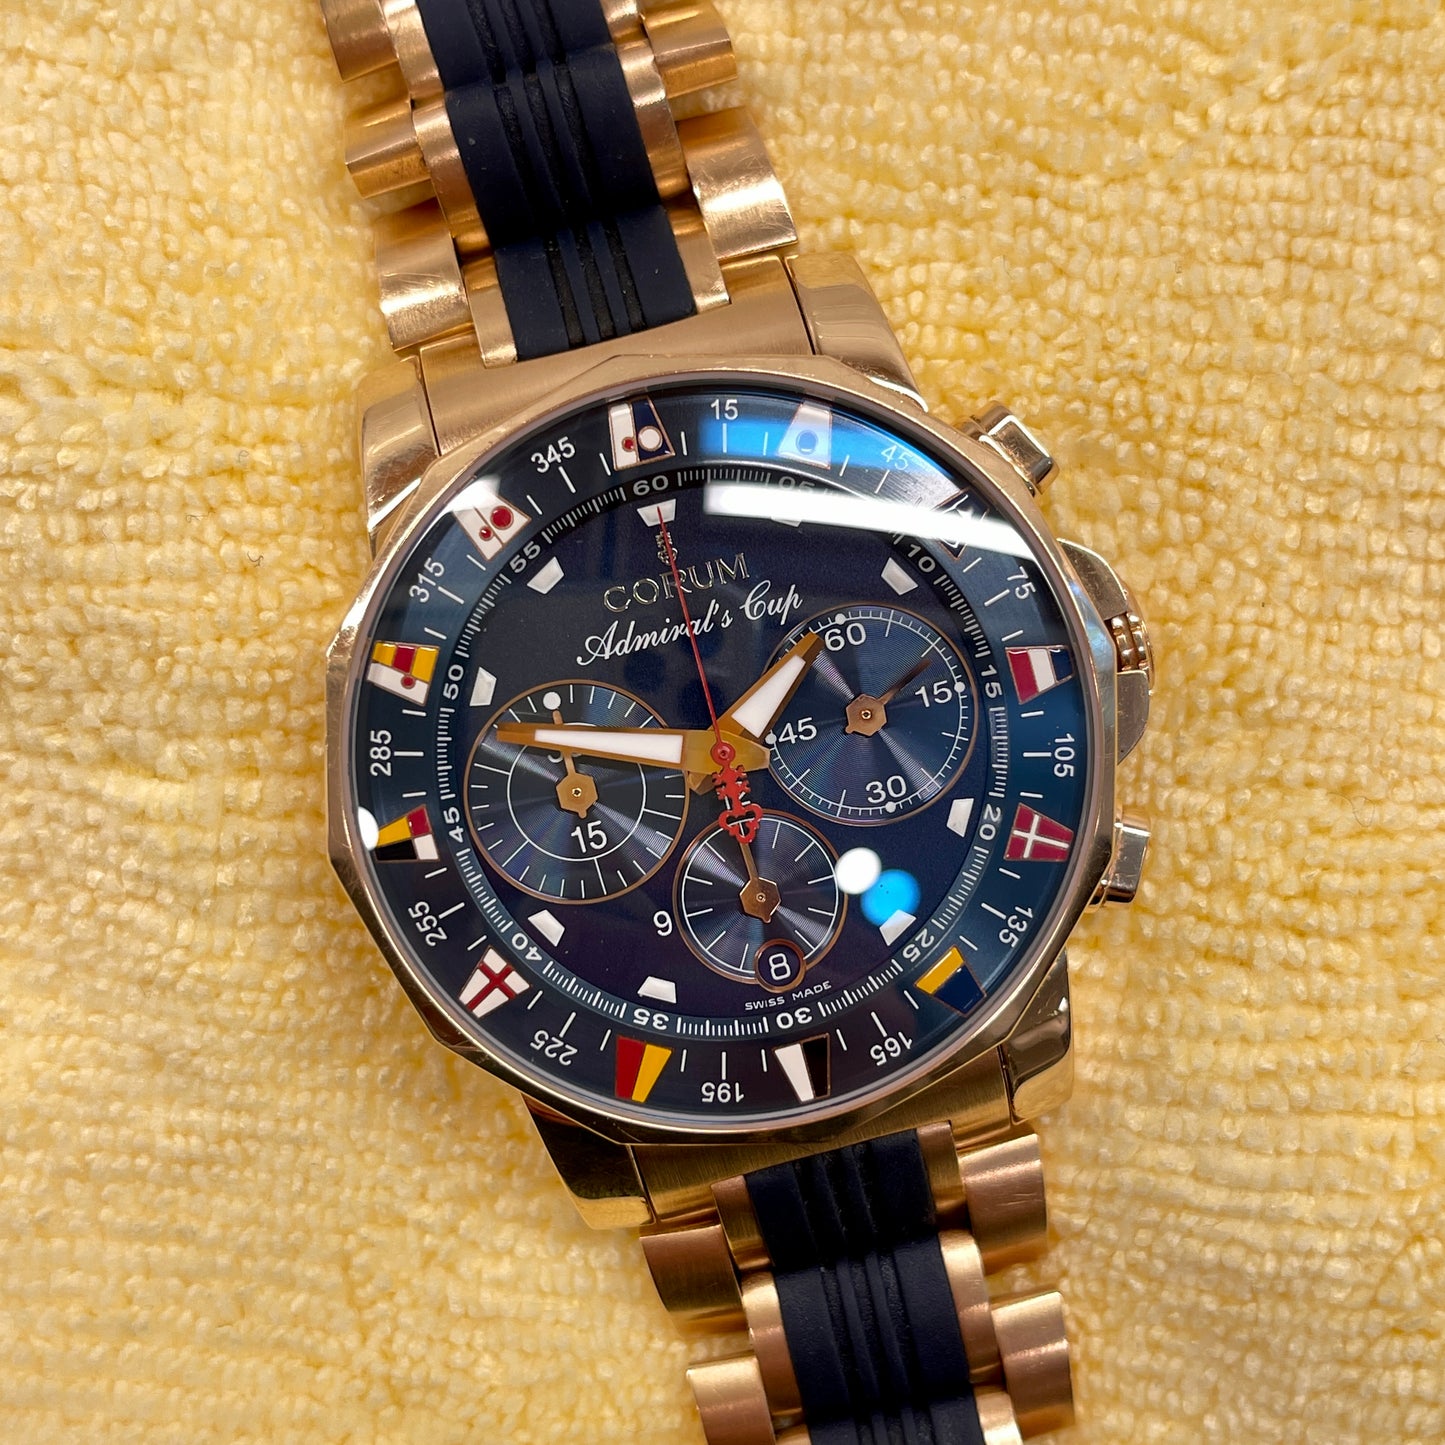 Corum Admiral's Cup Chronograph 44mm 18K Rose Gold Rubber Bracelet Blue Dial 985.673.55 - Hashtag Watch Company